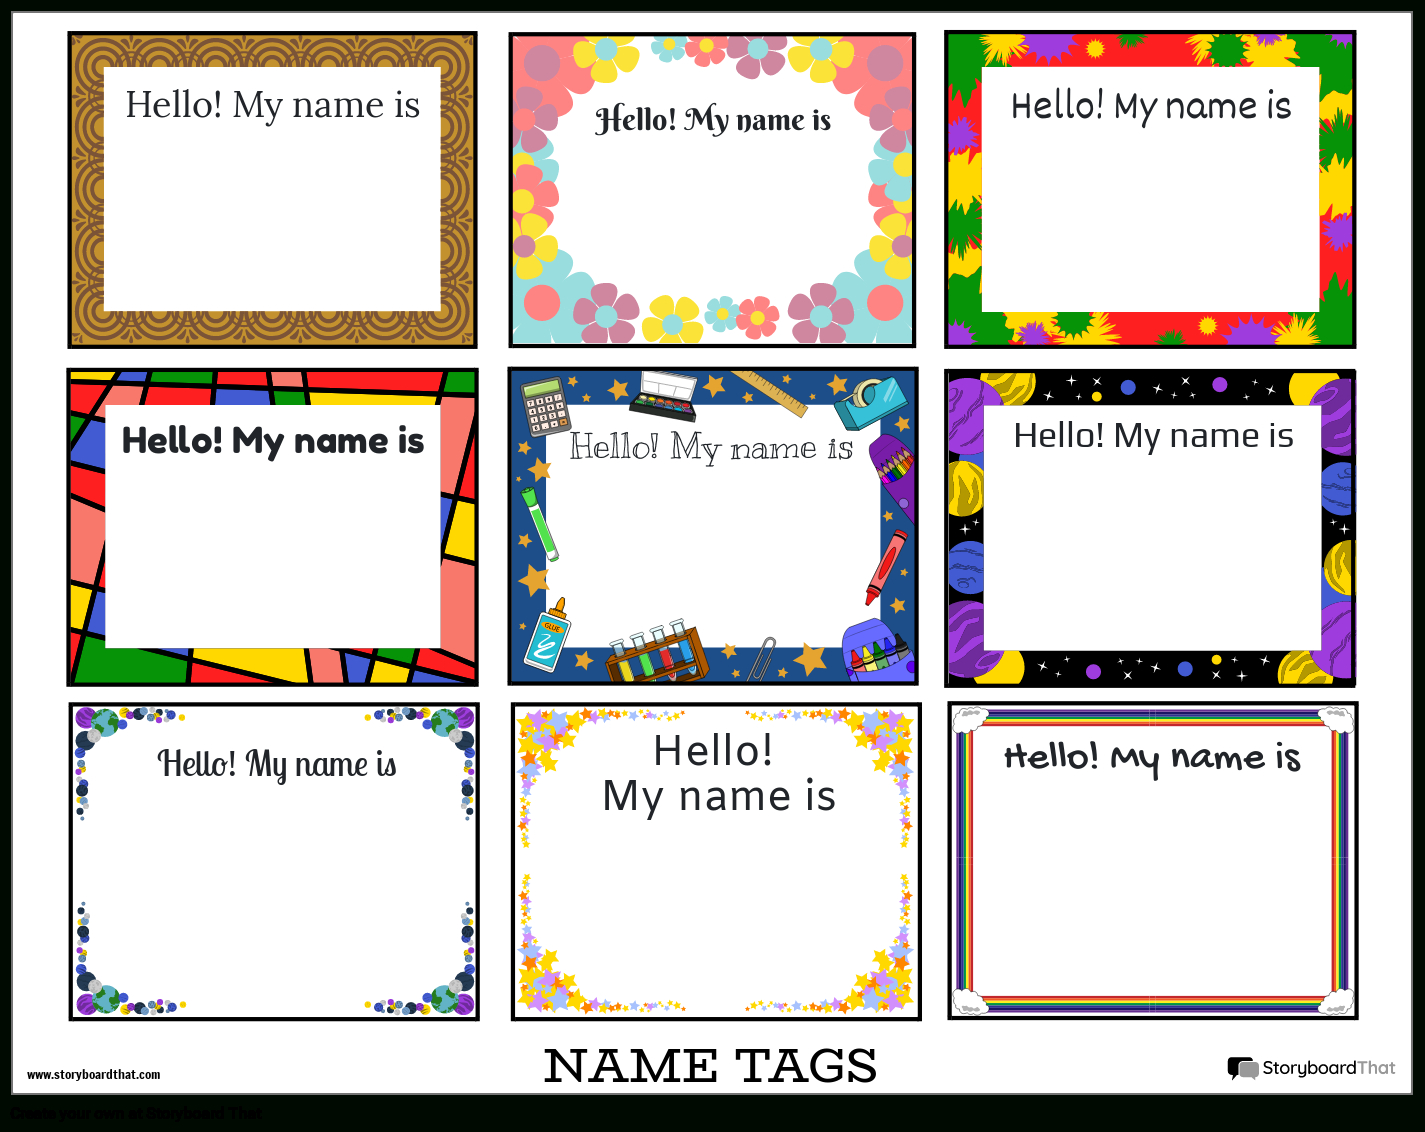 Create Custom Name Tag Templates - Online Maker intended for Free Customized Name Tags Printable